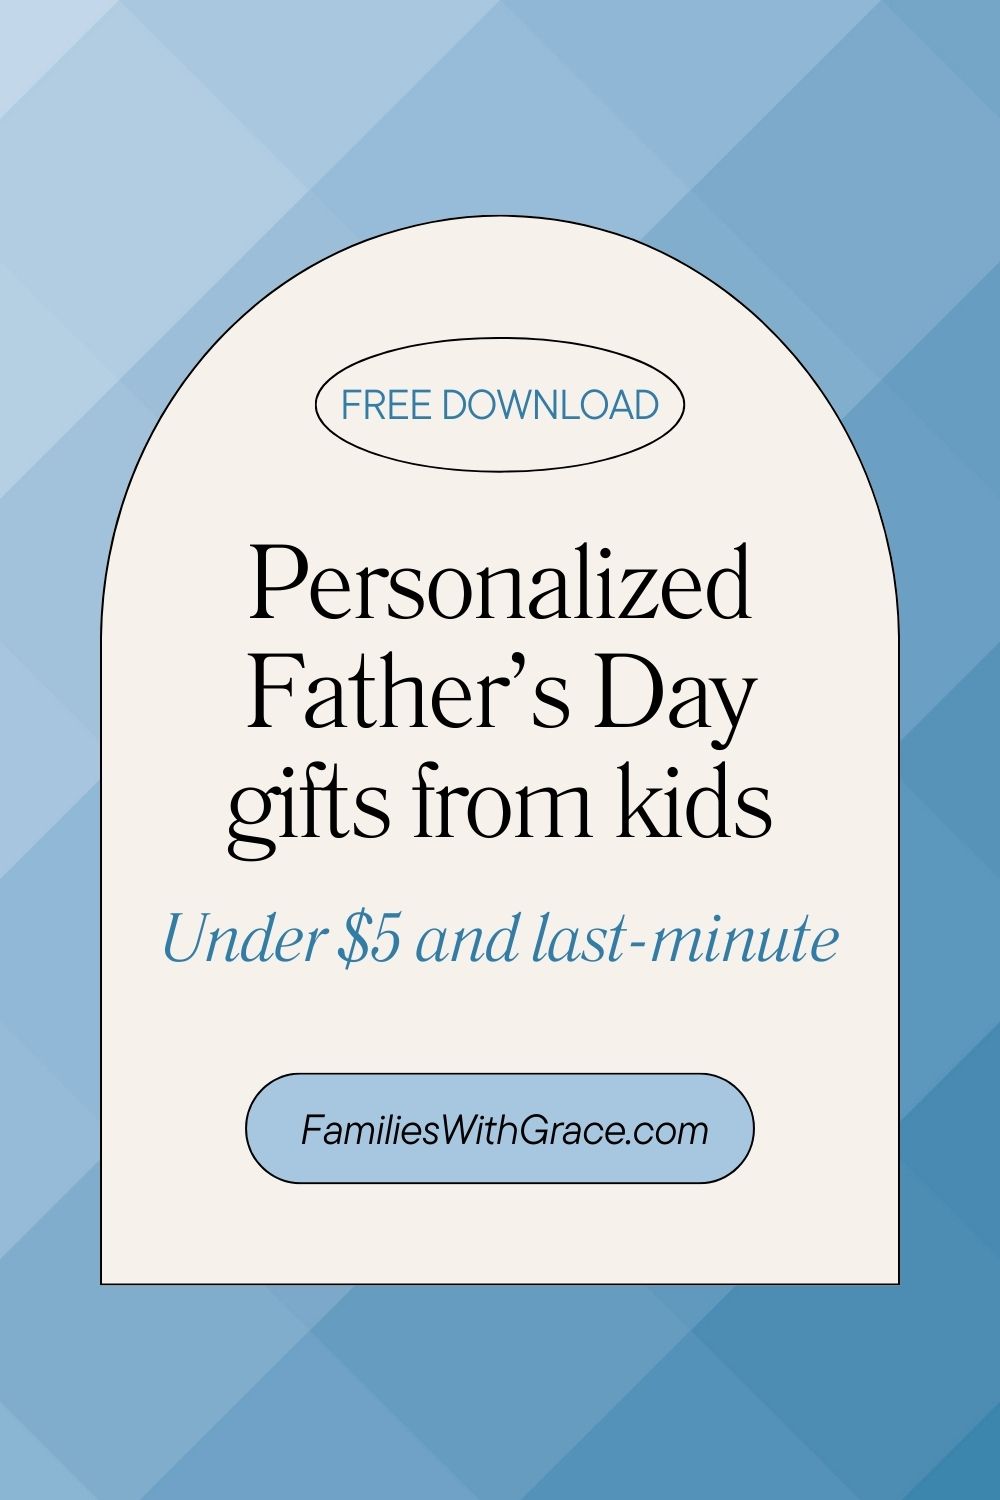 Last-minute personalized Father\'s Day gift ideas